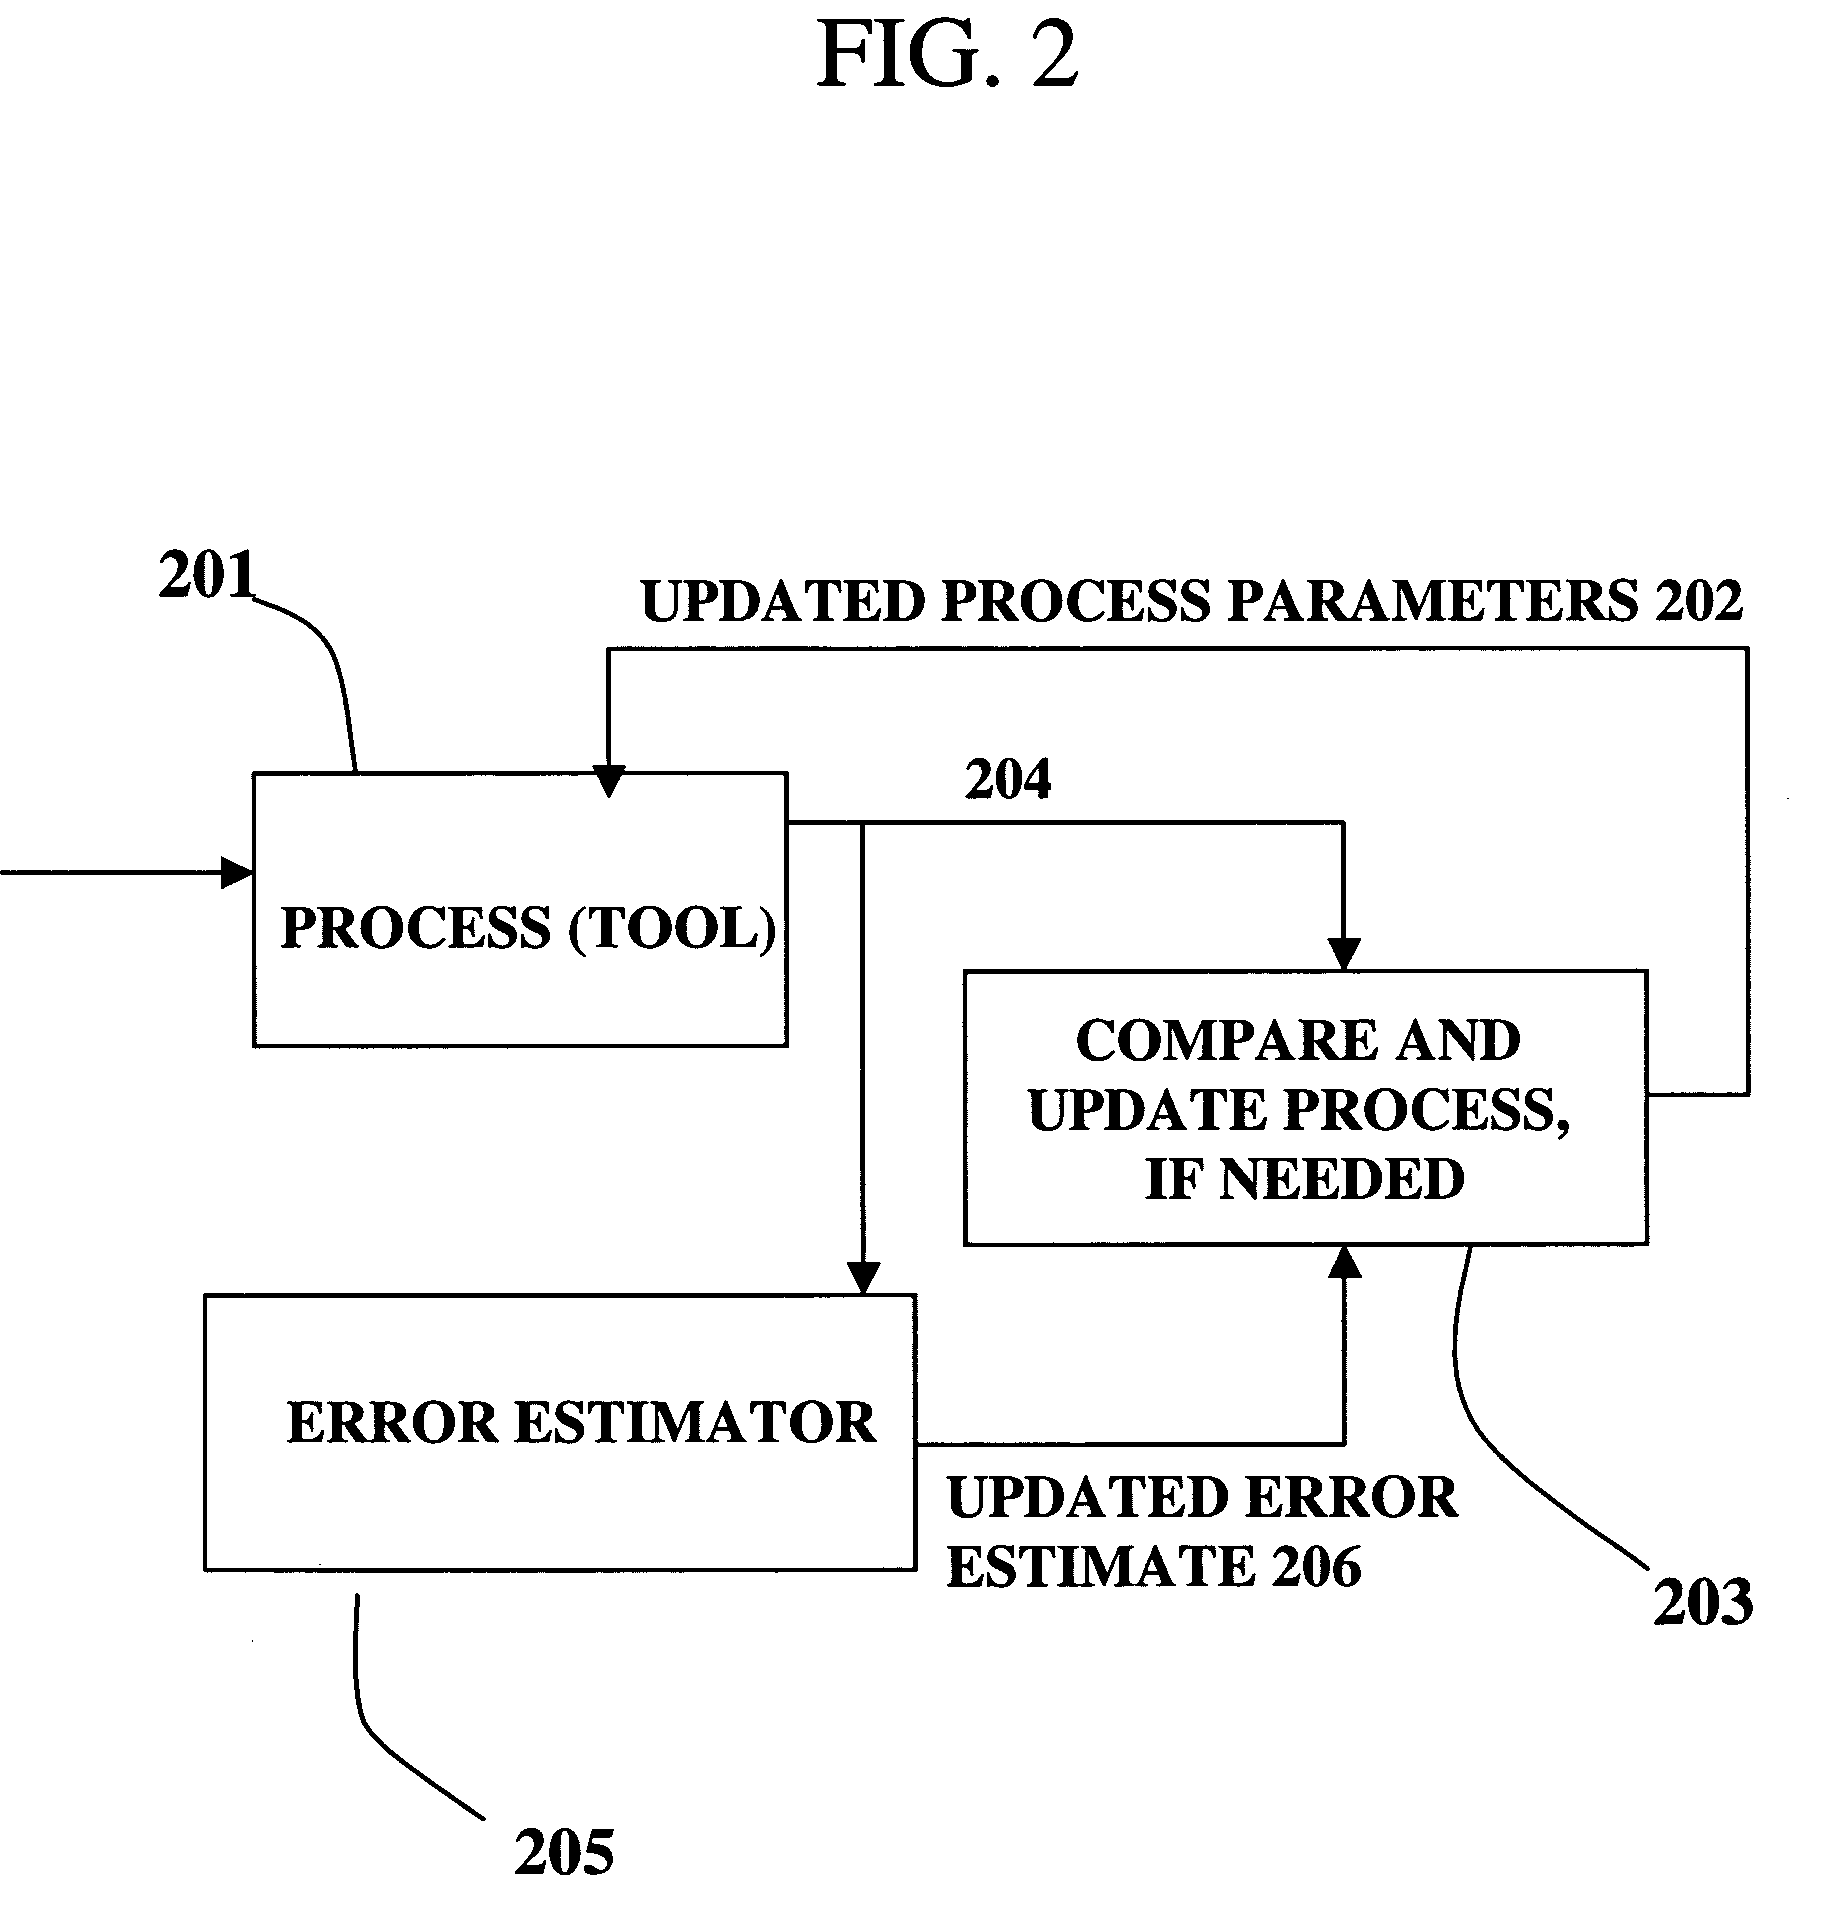 Adjusting manufacturing process control parameter using updated process threshold derived from uncontrollable error